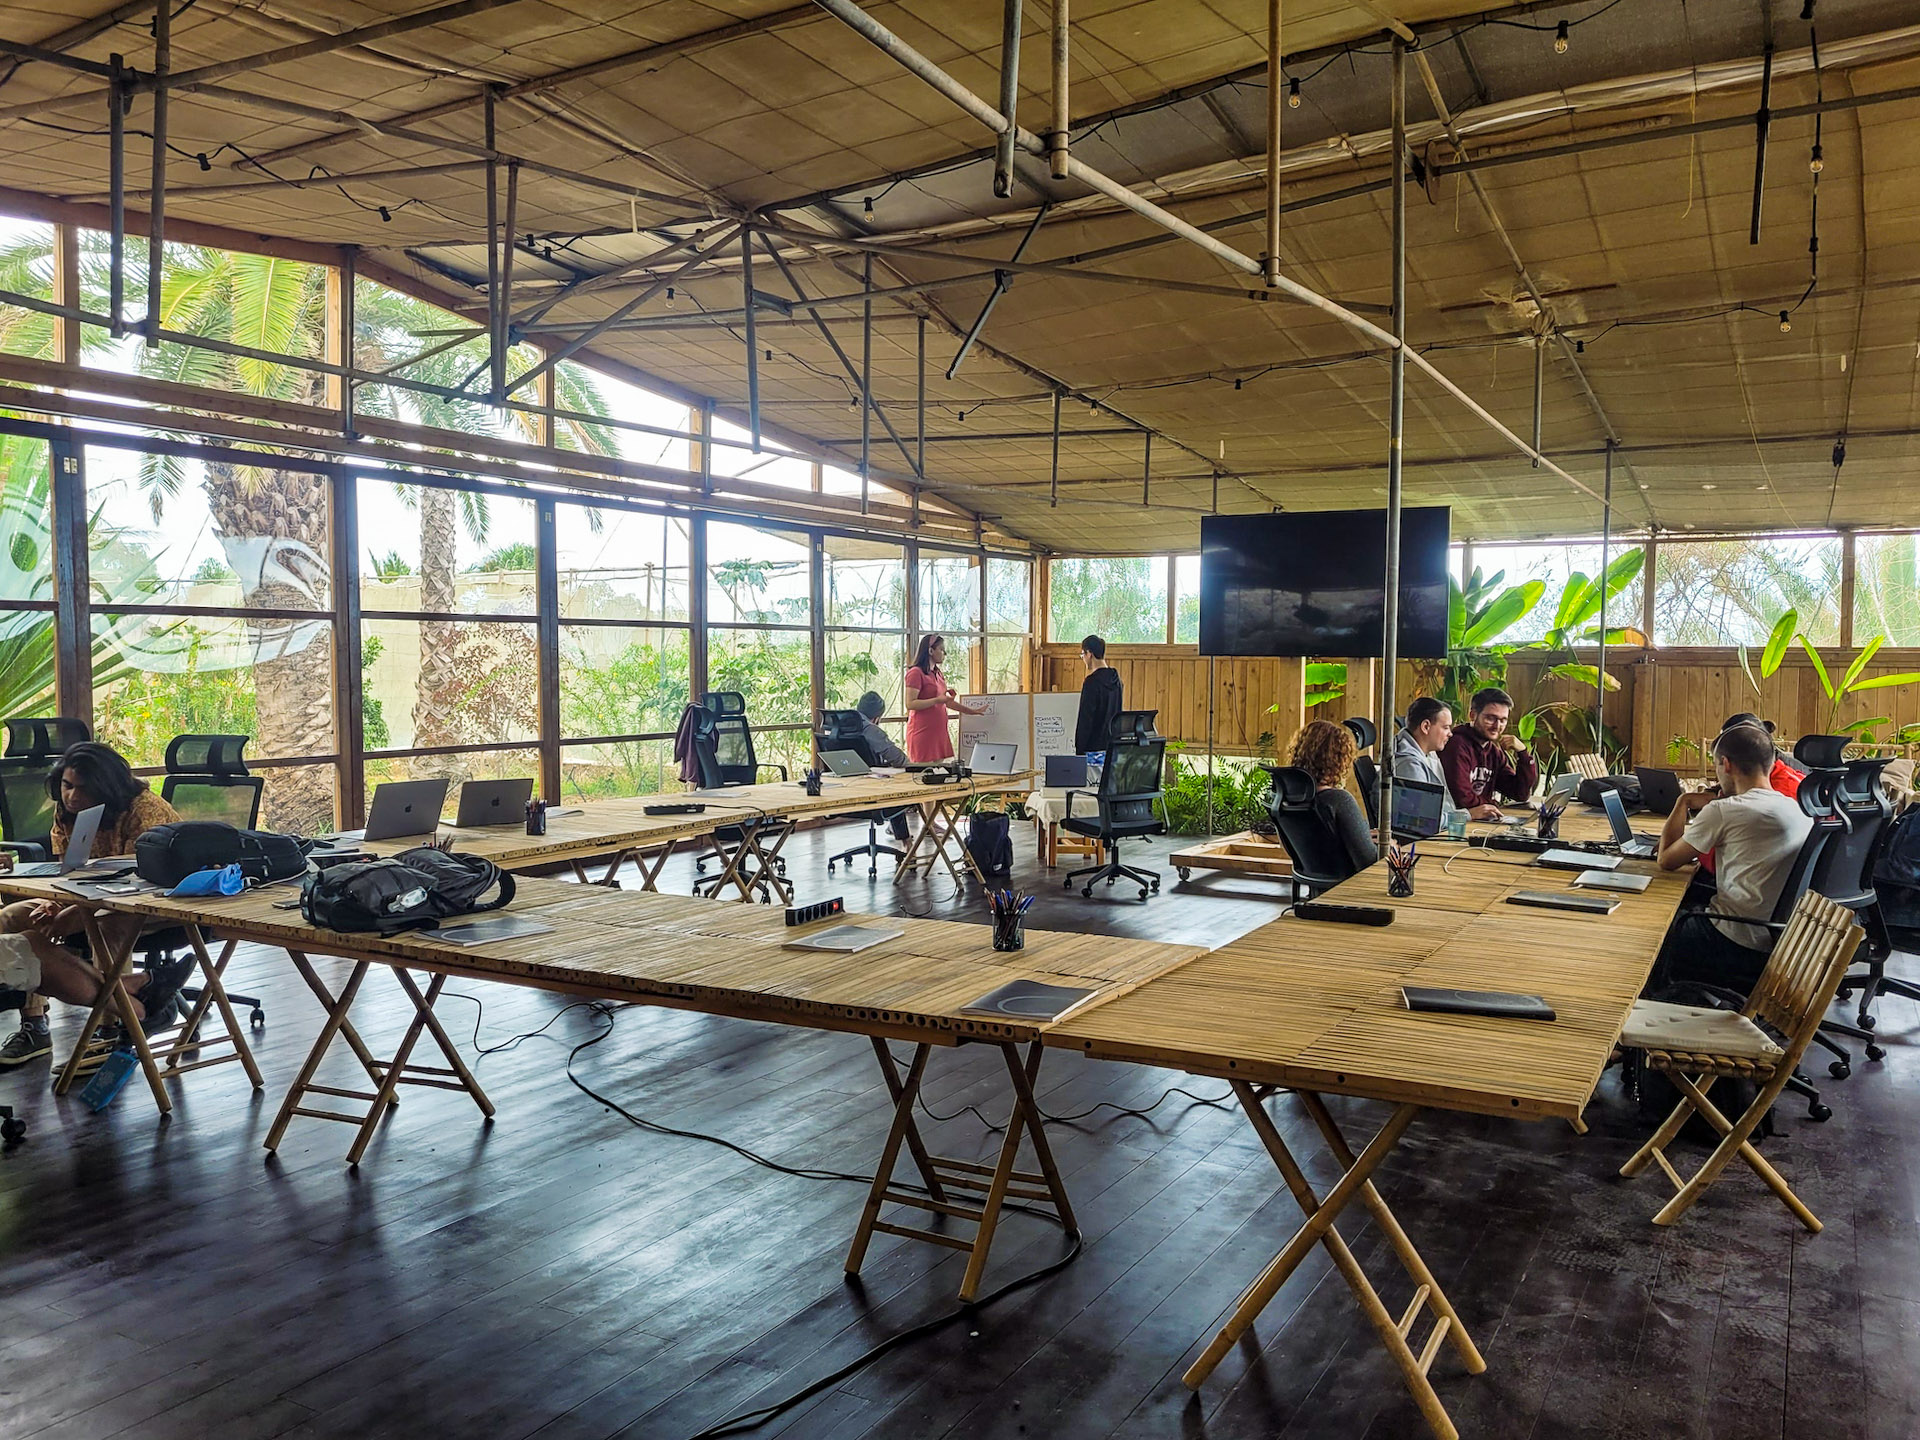 The product teams are seen spread out around a large indoor/outdoor workspace